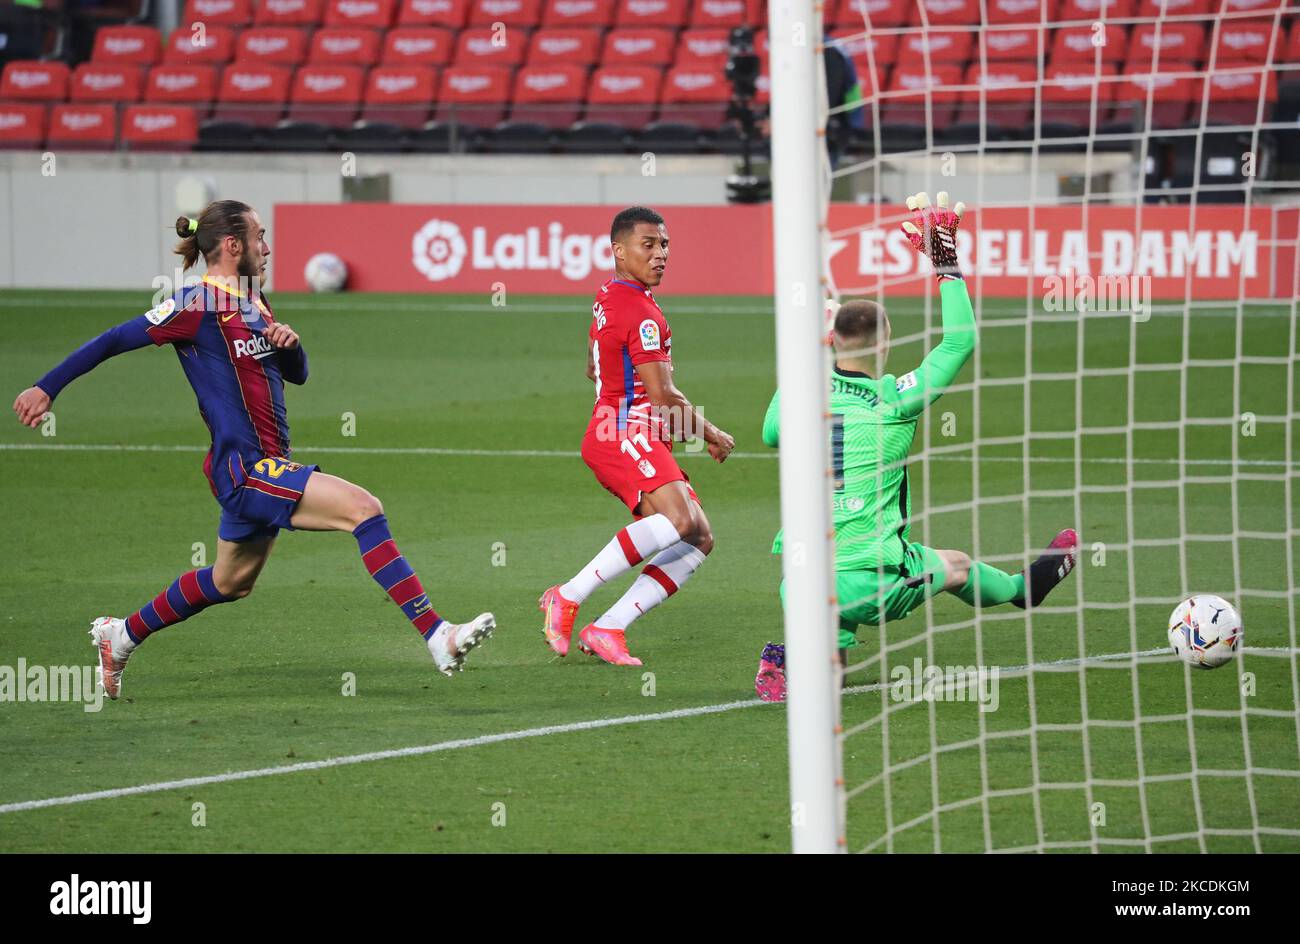 Darwin Machis scores during the match between FC Barcelona and Granada CF , corresponding to the week 33 of the Liga Santander, played at the Camp Nou Stadium on 29th April 2021, in Barcelona, Spain. (Photo by Joan Valls/Urbanandsport/NurPhoto) Stock Photo